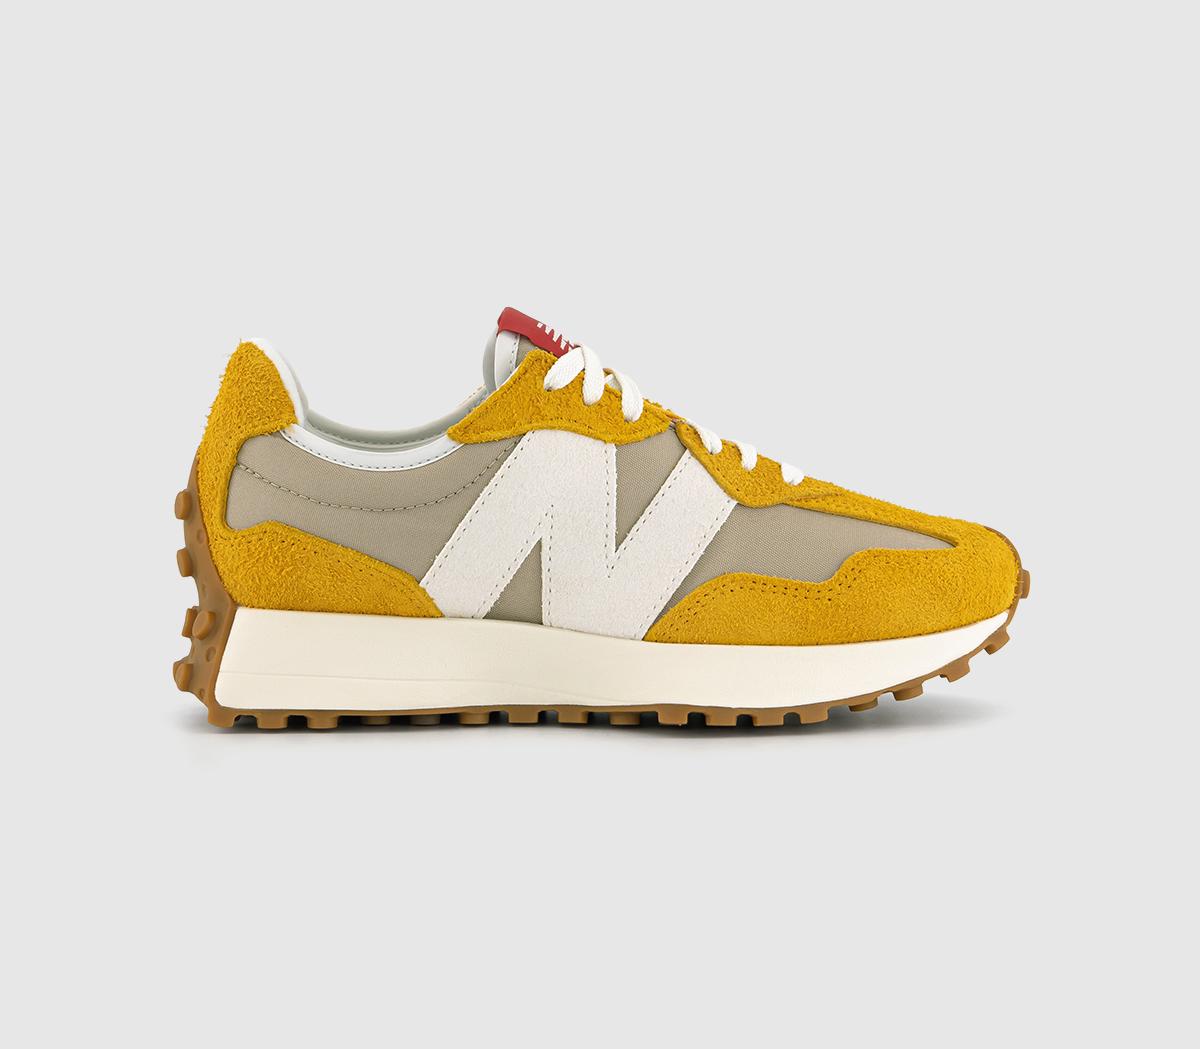 New Balance 327 Trainers Varsity Gold Grey - Men's Trainers